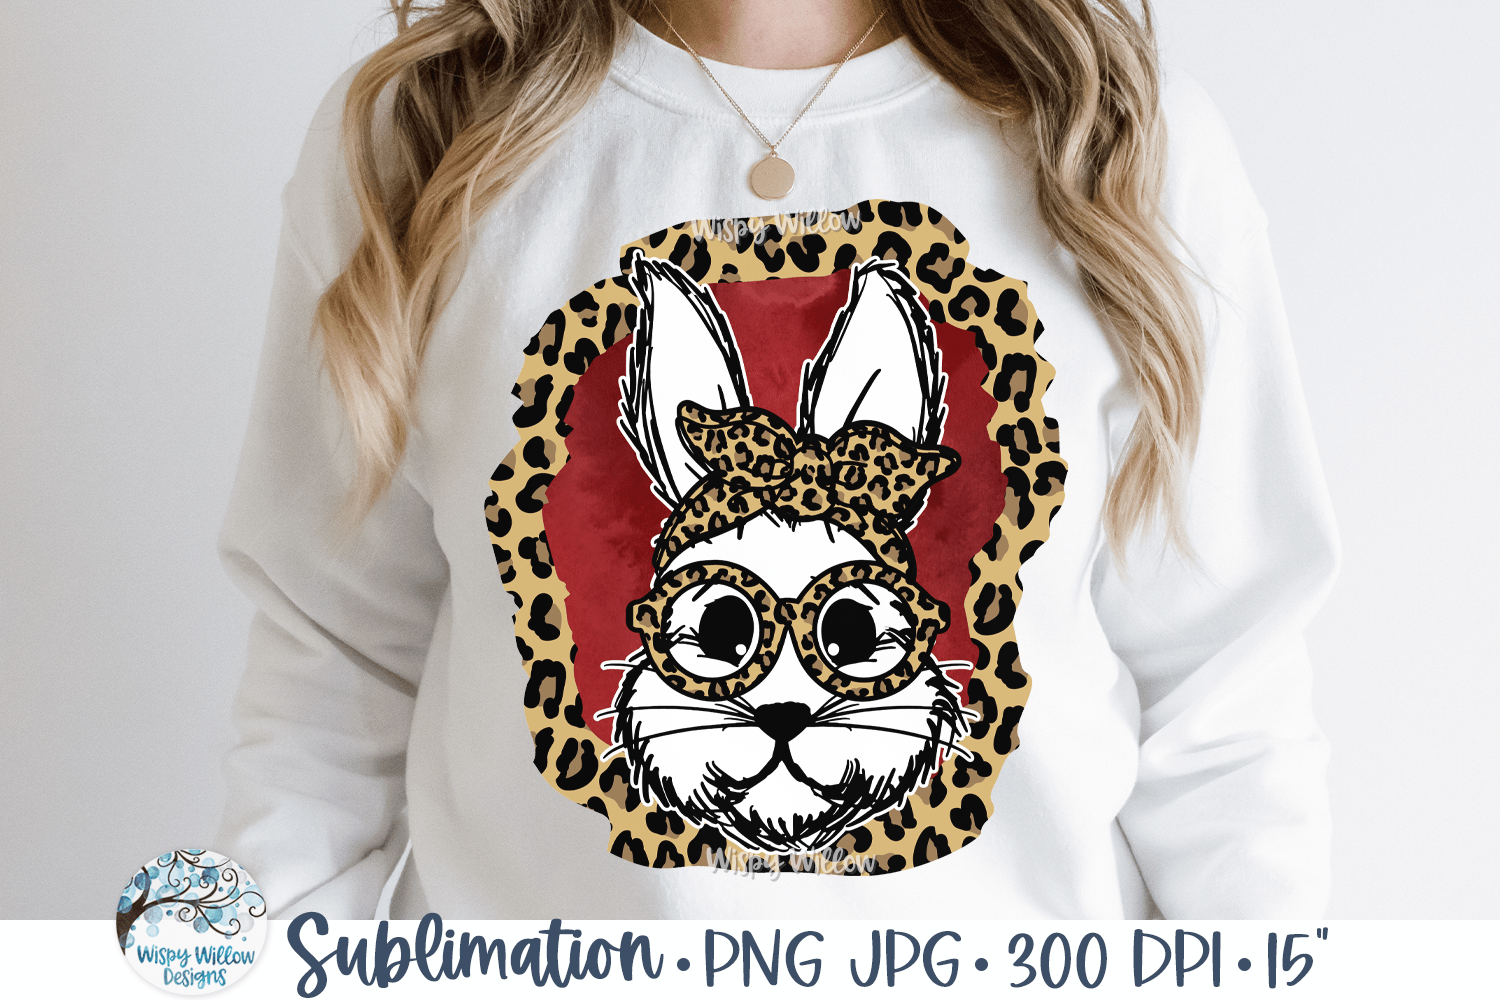 Easter Bunny with Leopard Print Glasses and Bandana PNG JPG Wispy Willow Designs Company